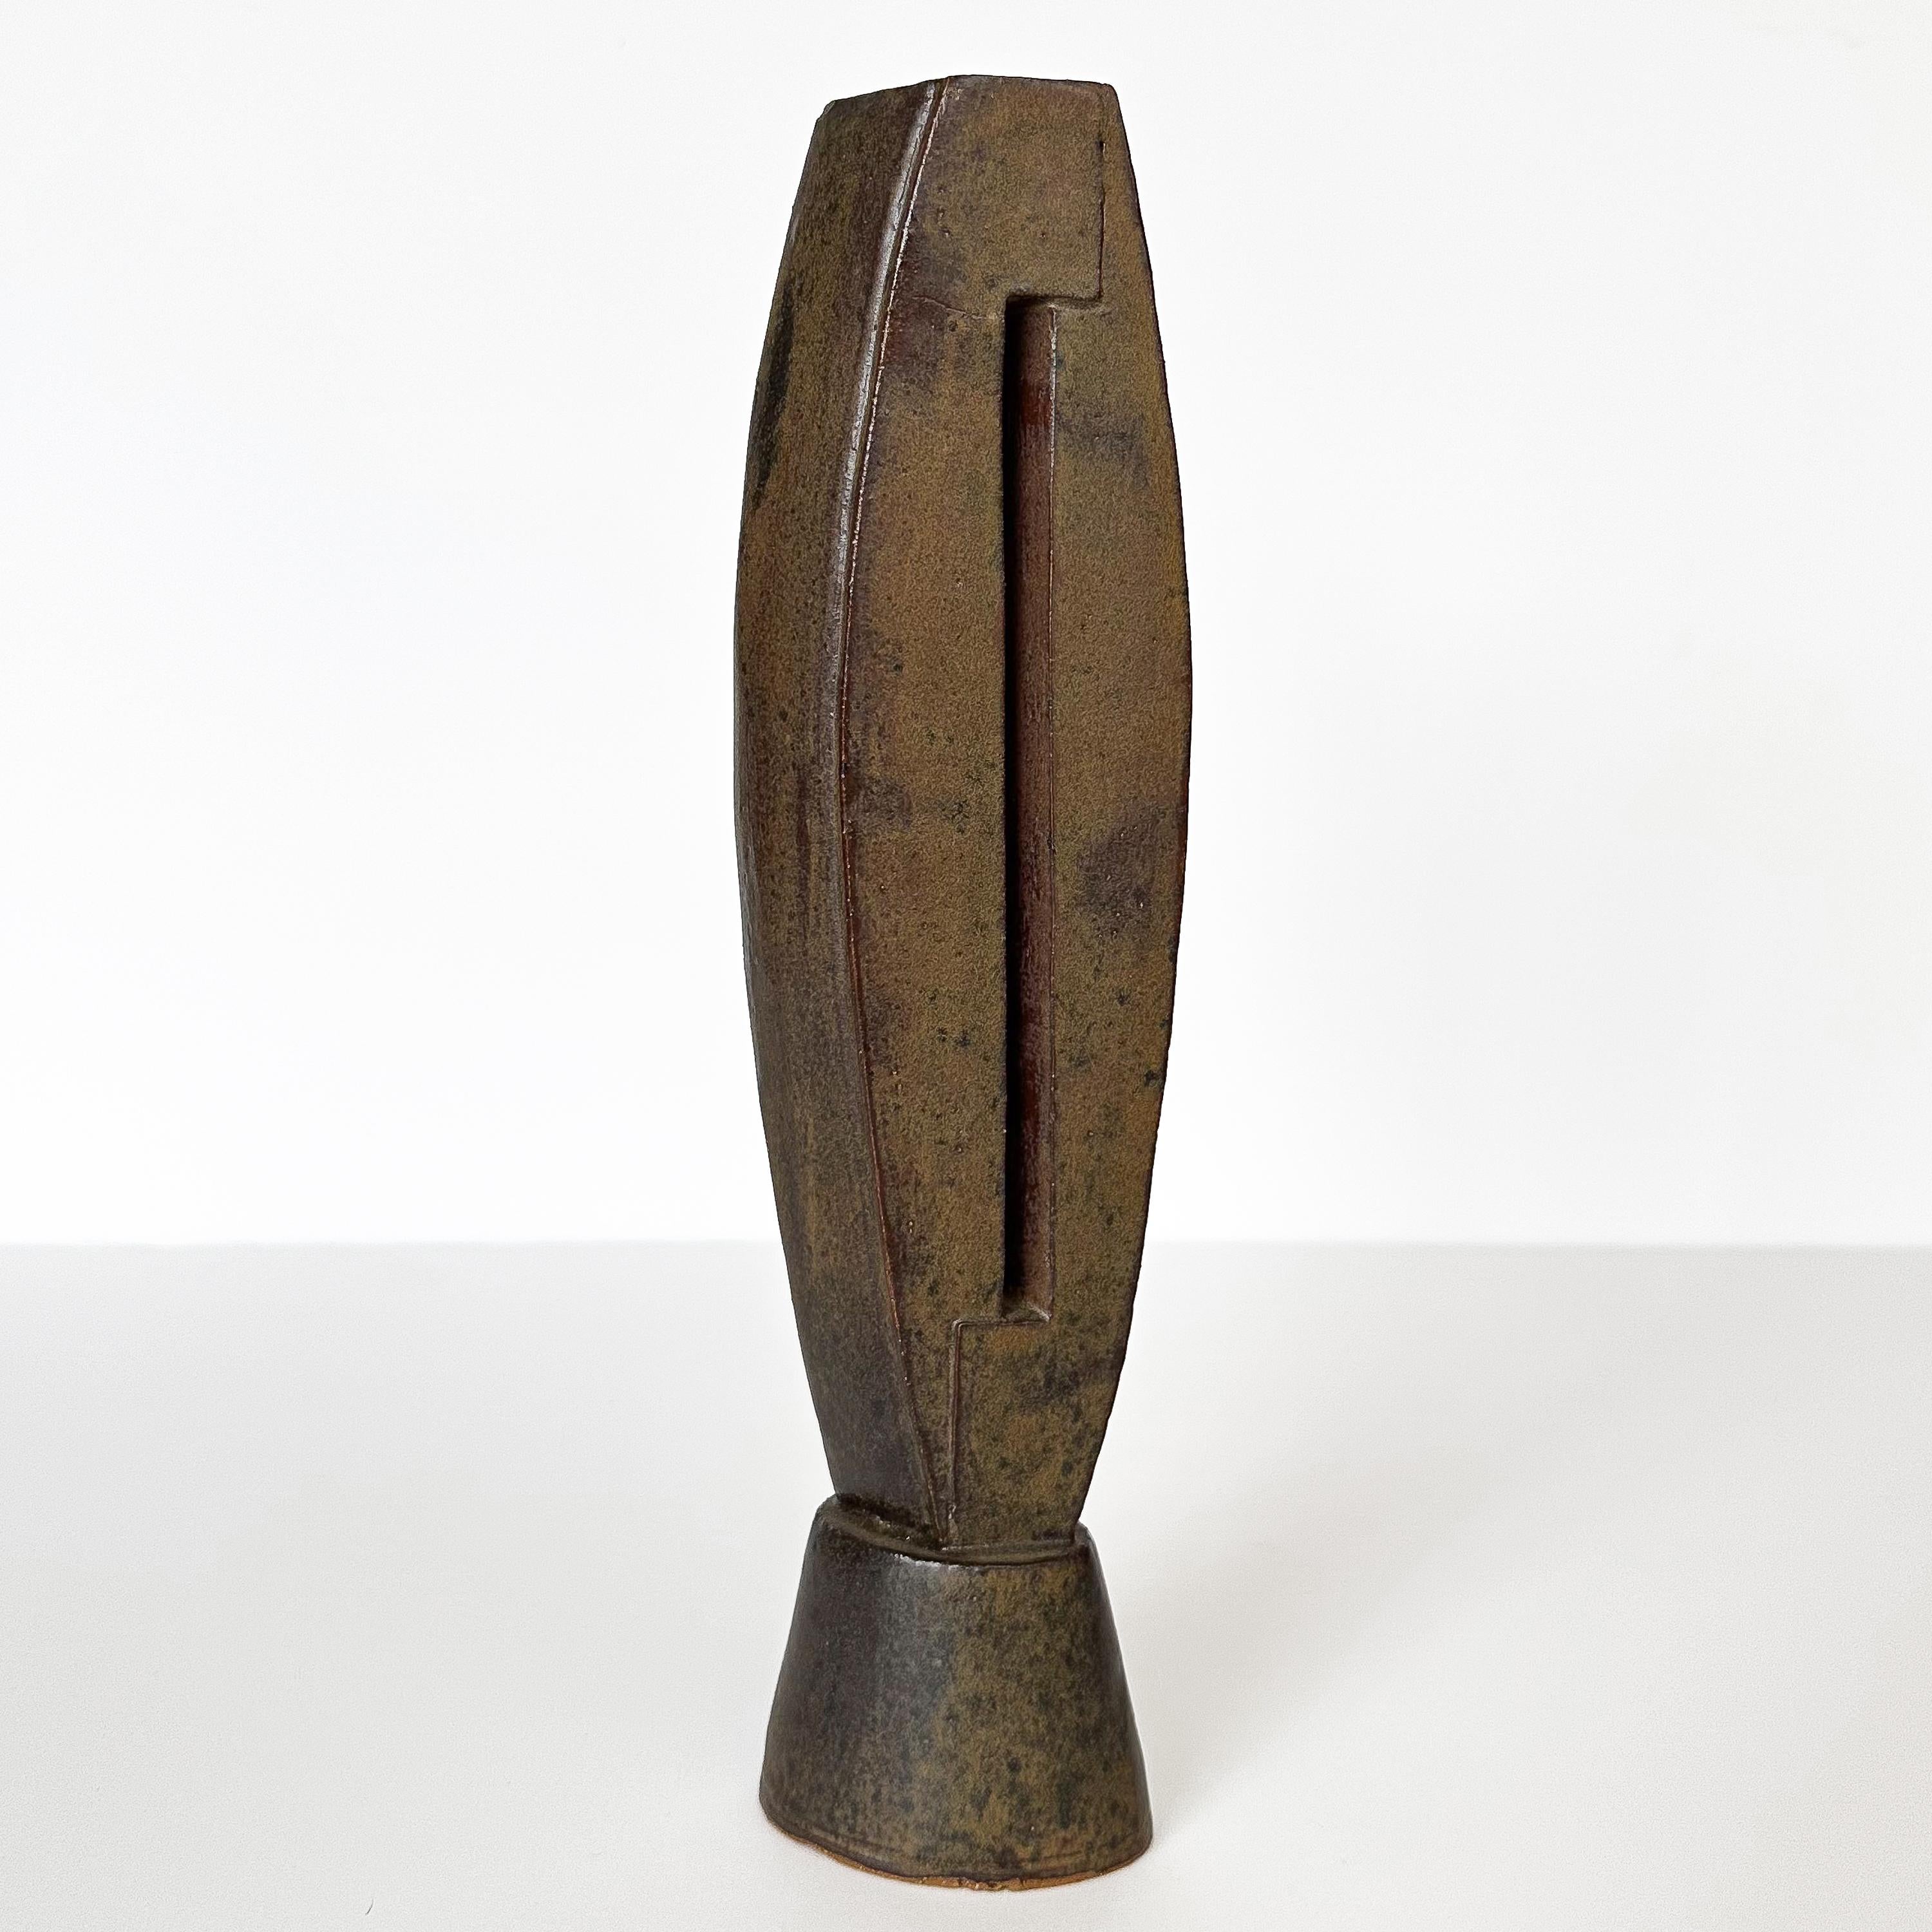 Introducing a spellbinding piece of studio pottery abstract sculpture by the renowned Russian-American artist, Vladimir Donchik (b. 1943). Donchik is celebrated for his masterful blend of form, function, and fluidity, and this piece is a sublime